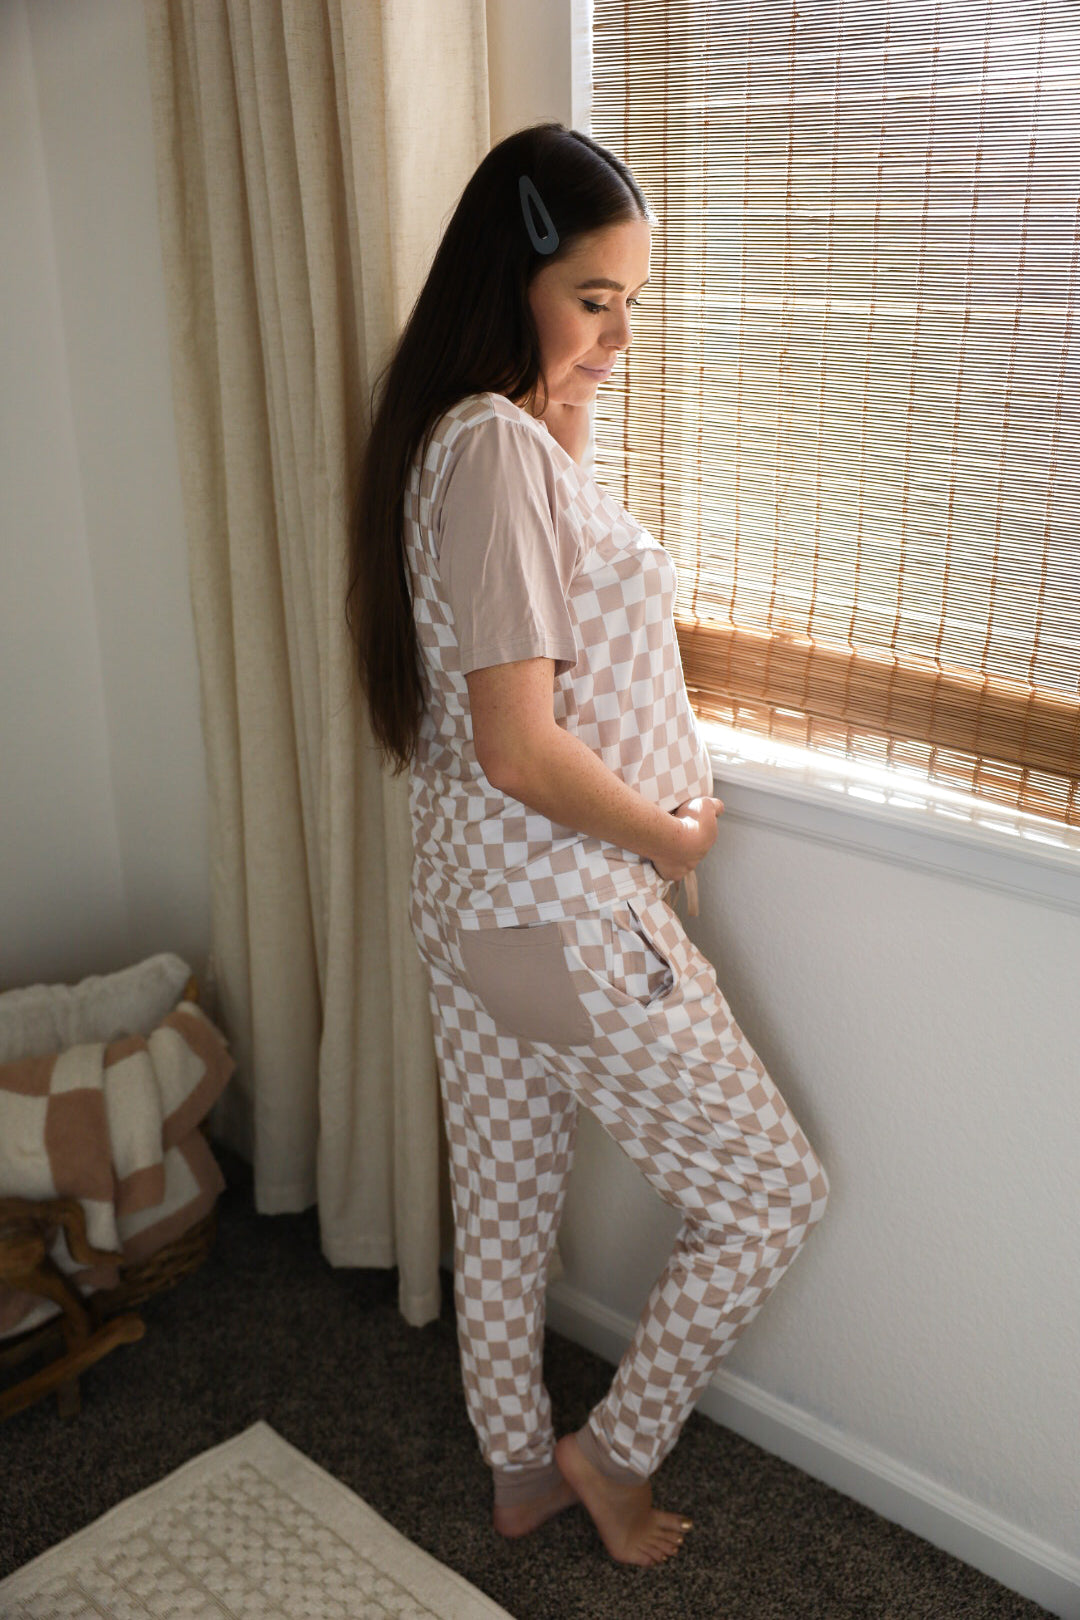 Bamboo maternity, postpartum, pregnancy and breastfeeding accessible women's pajamas set in neutral, beige checkered.